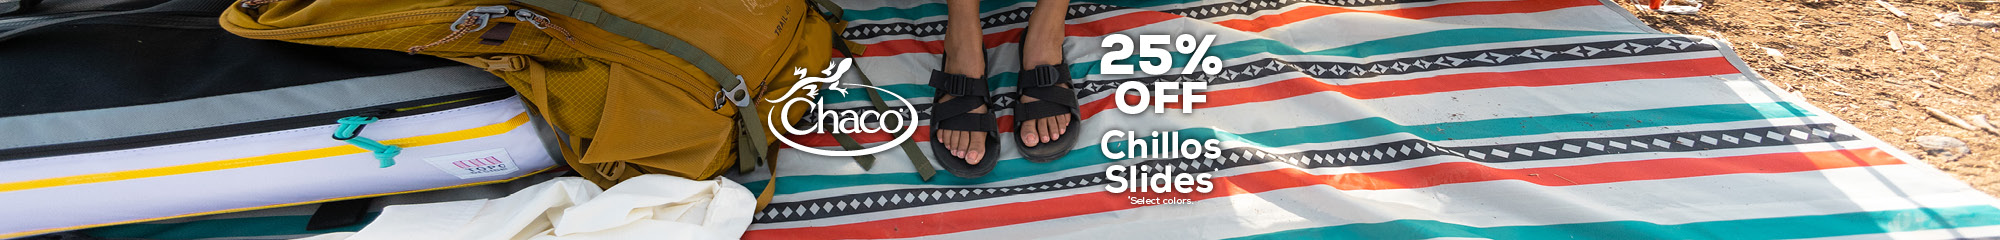 Select Chaco Chillos Slides 25% Off